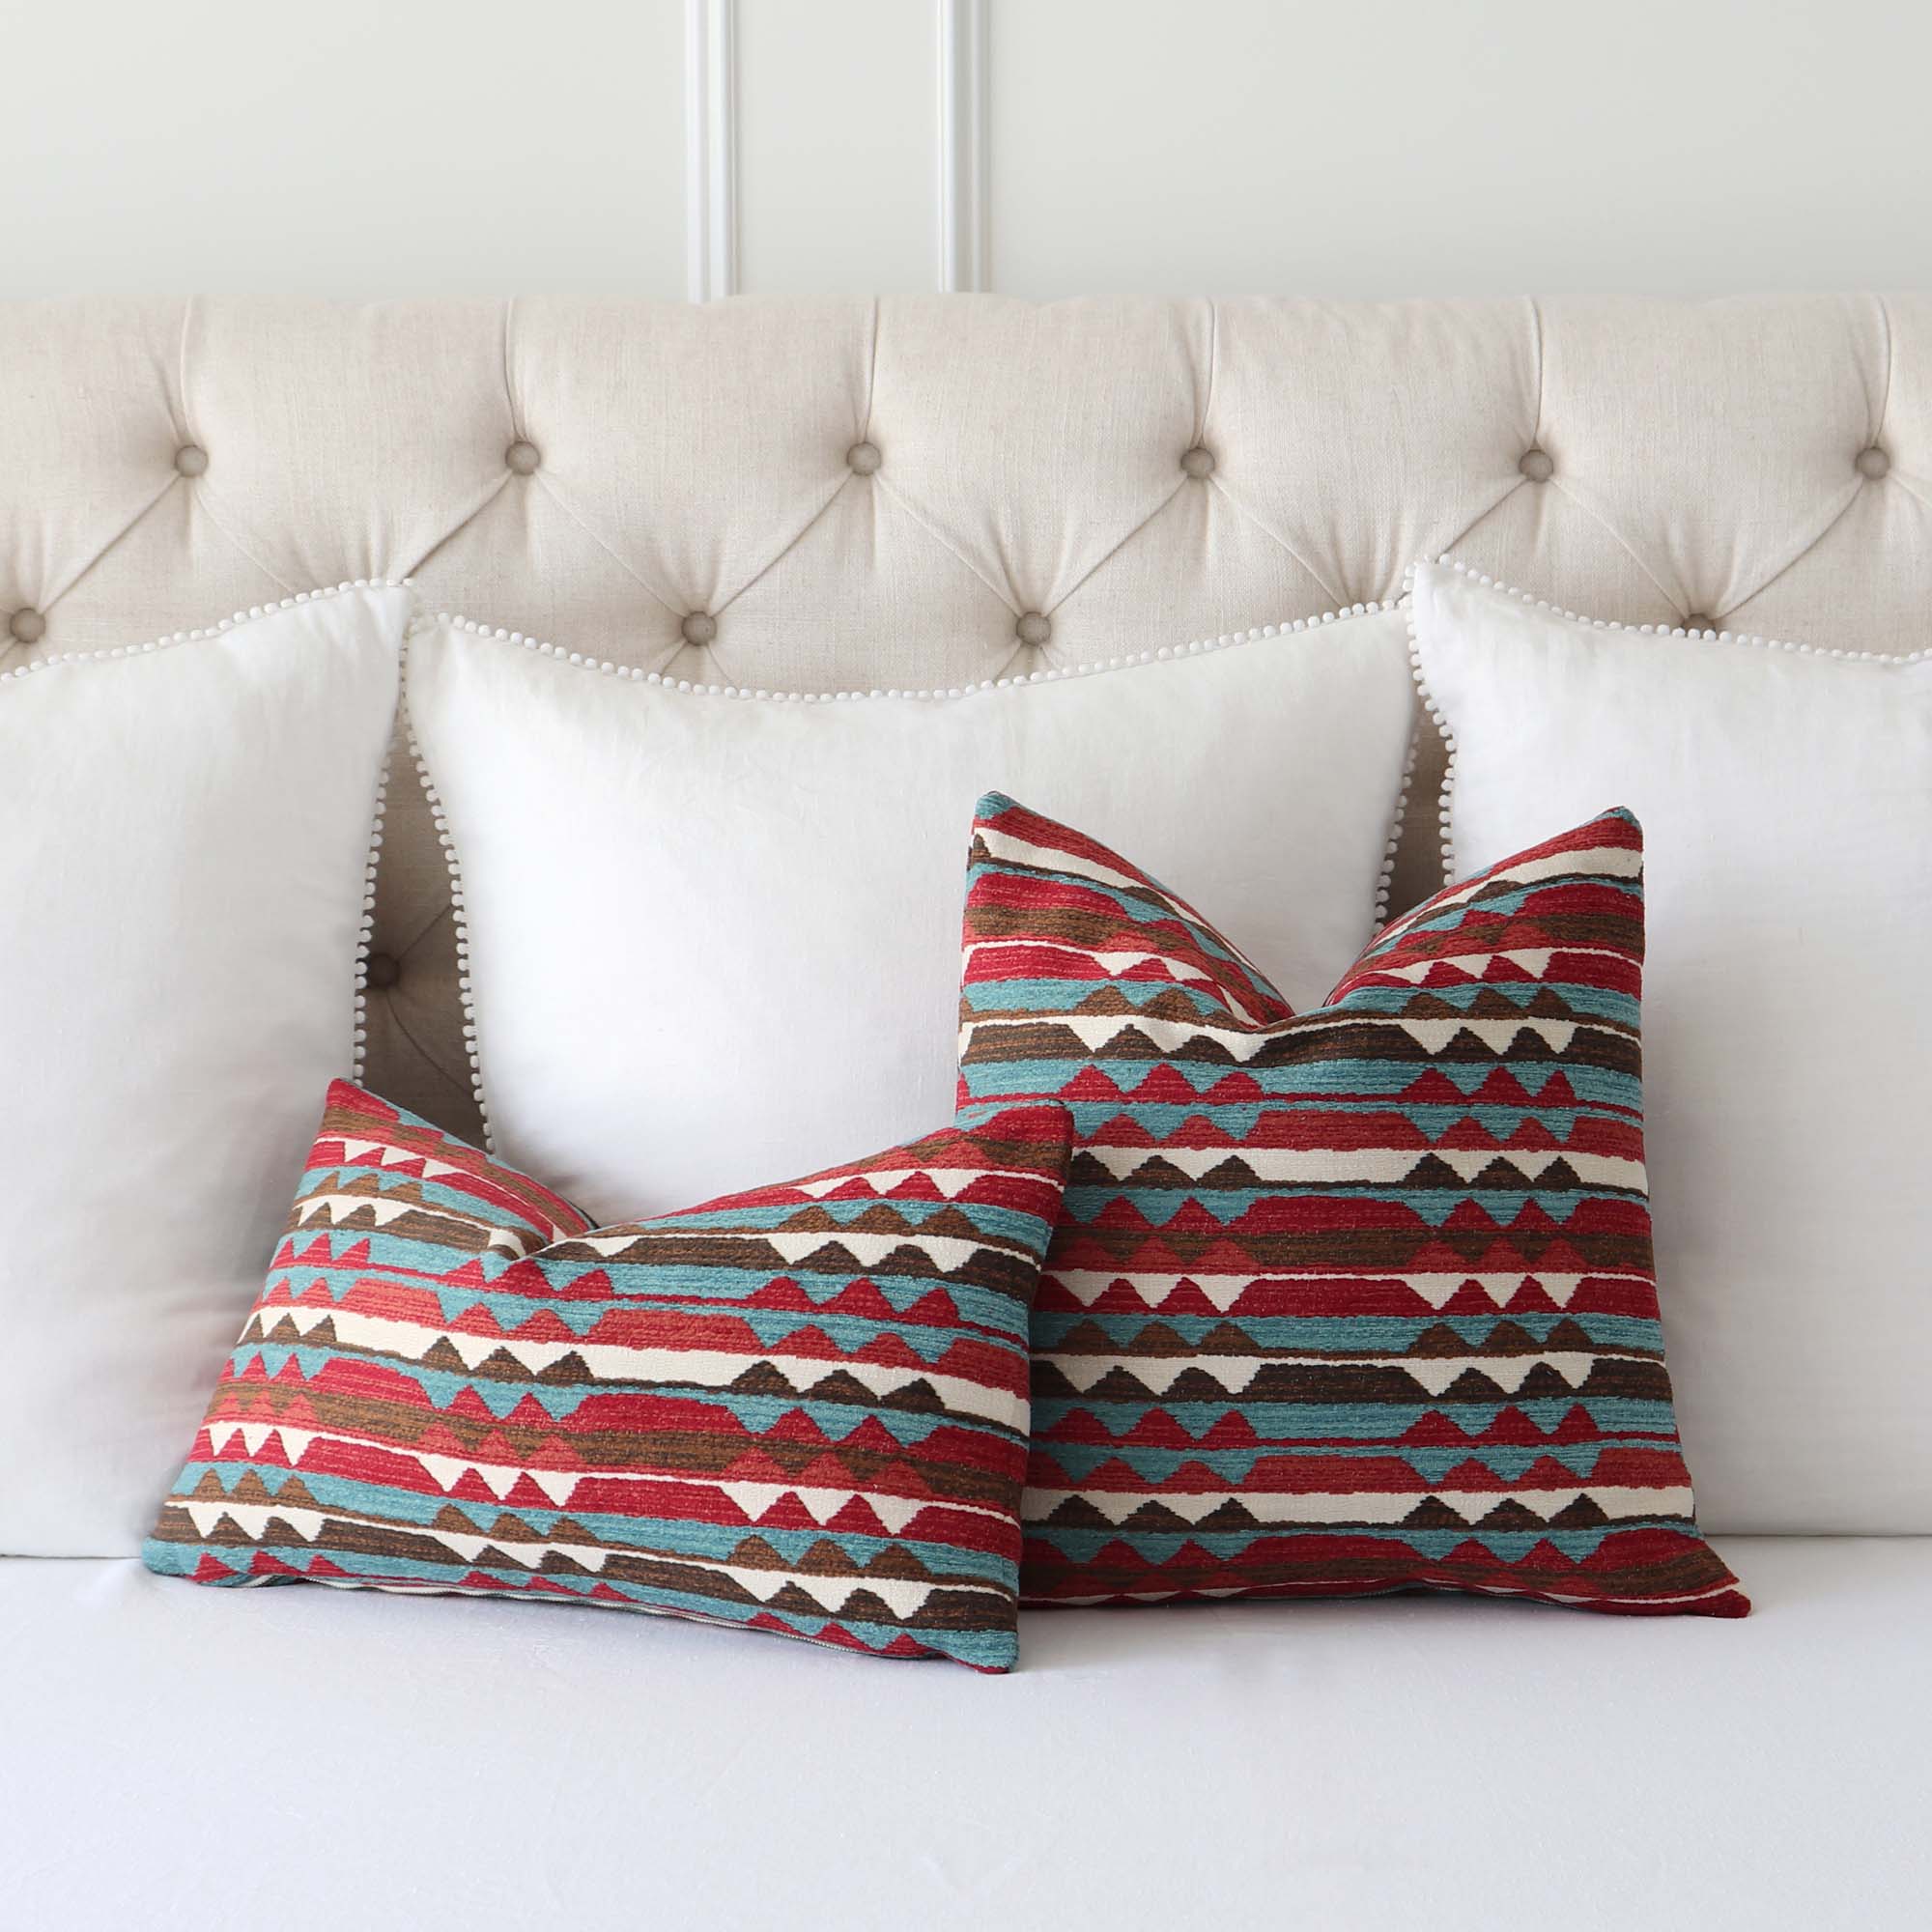 How to Spot-Clean Decorative Throw Pillows - Chloe & Olive